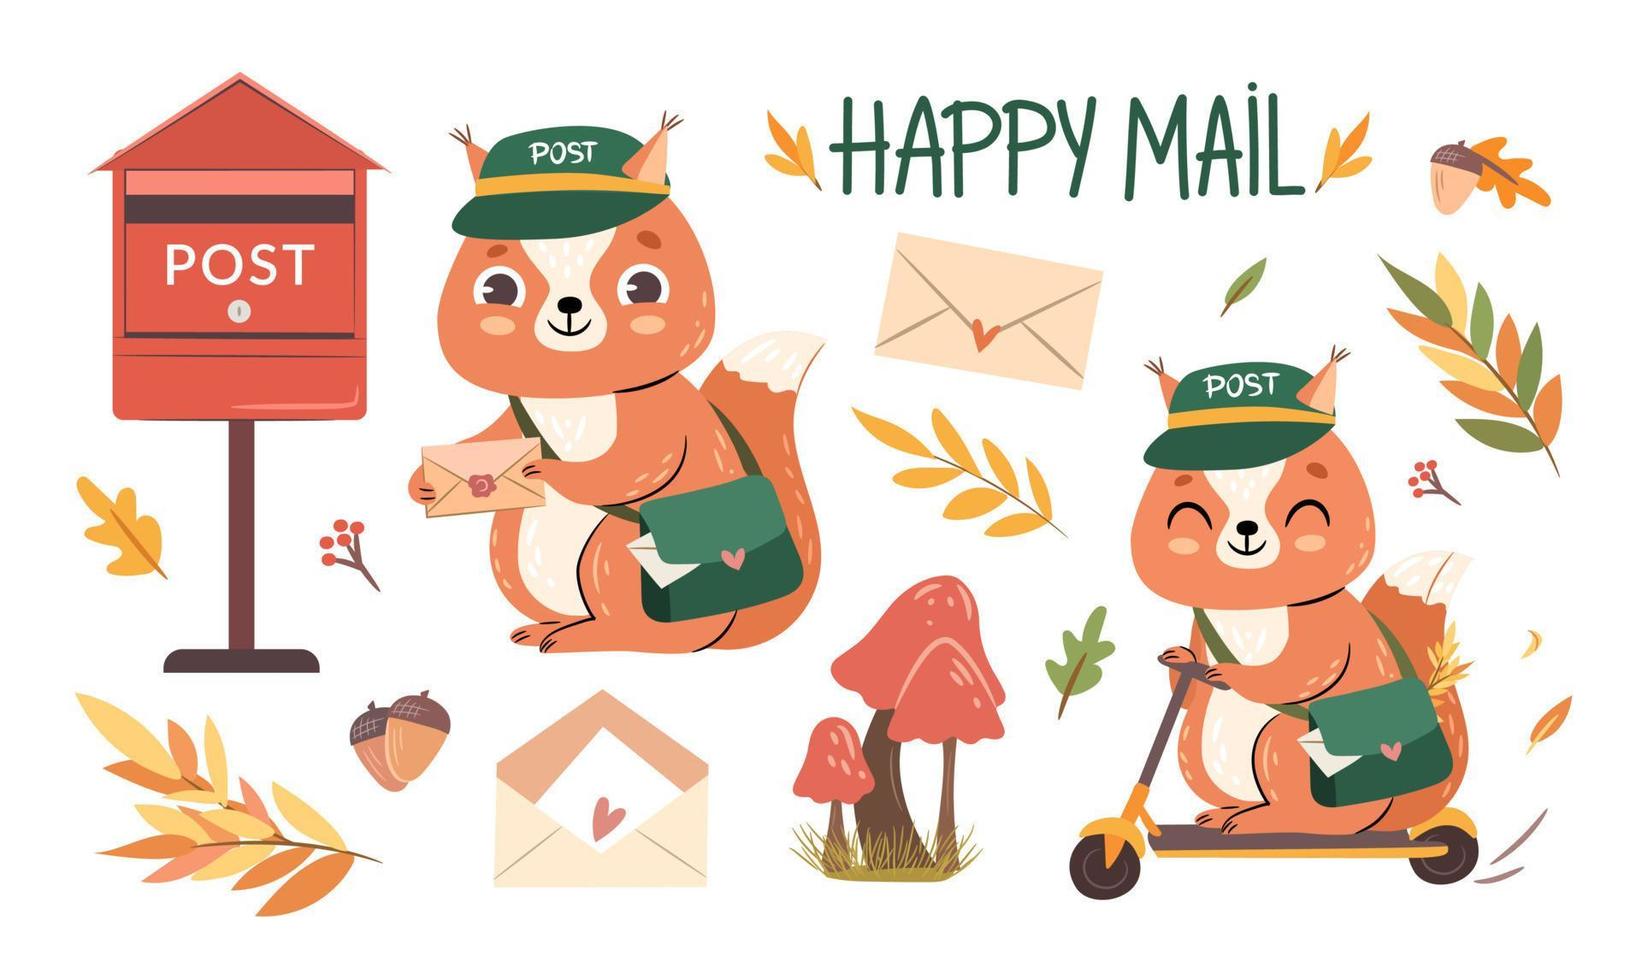 Autumn post set. Cute squirrel mailman with leaves, letters, mail box, mail bag. Isolated Fall woodland elements. Hand-drawn flat vector illustration